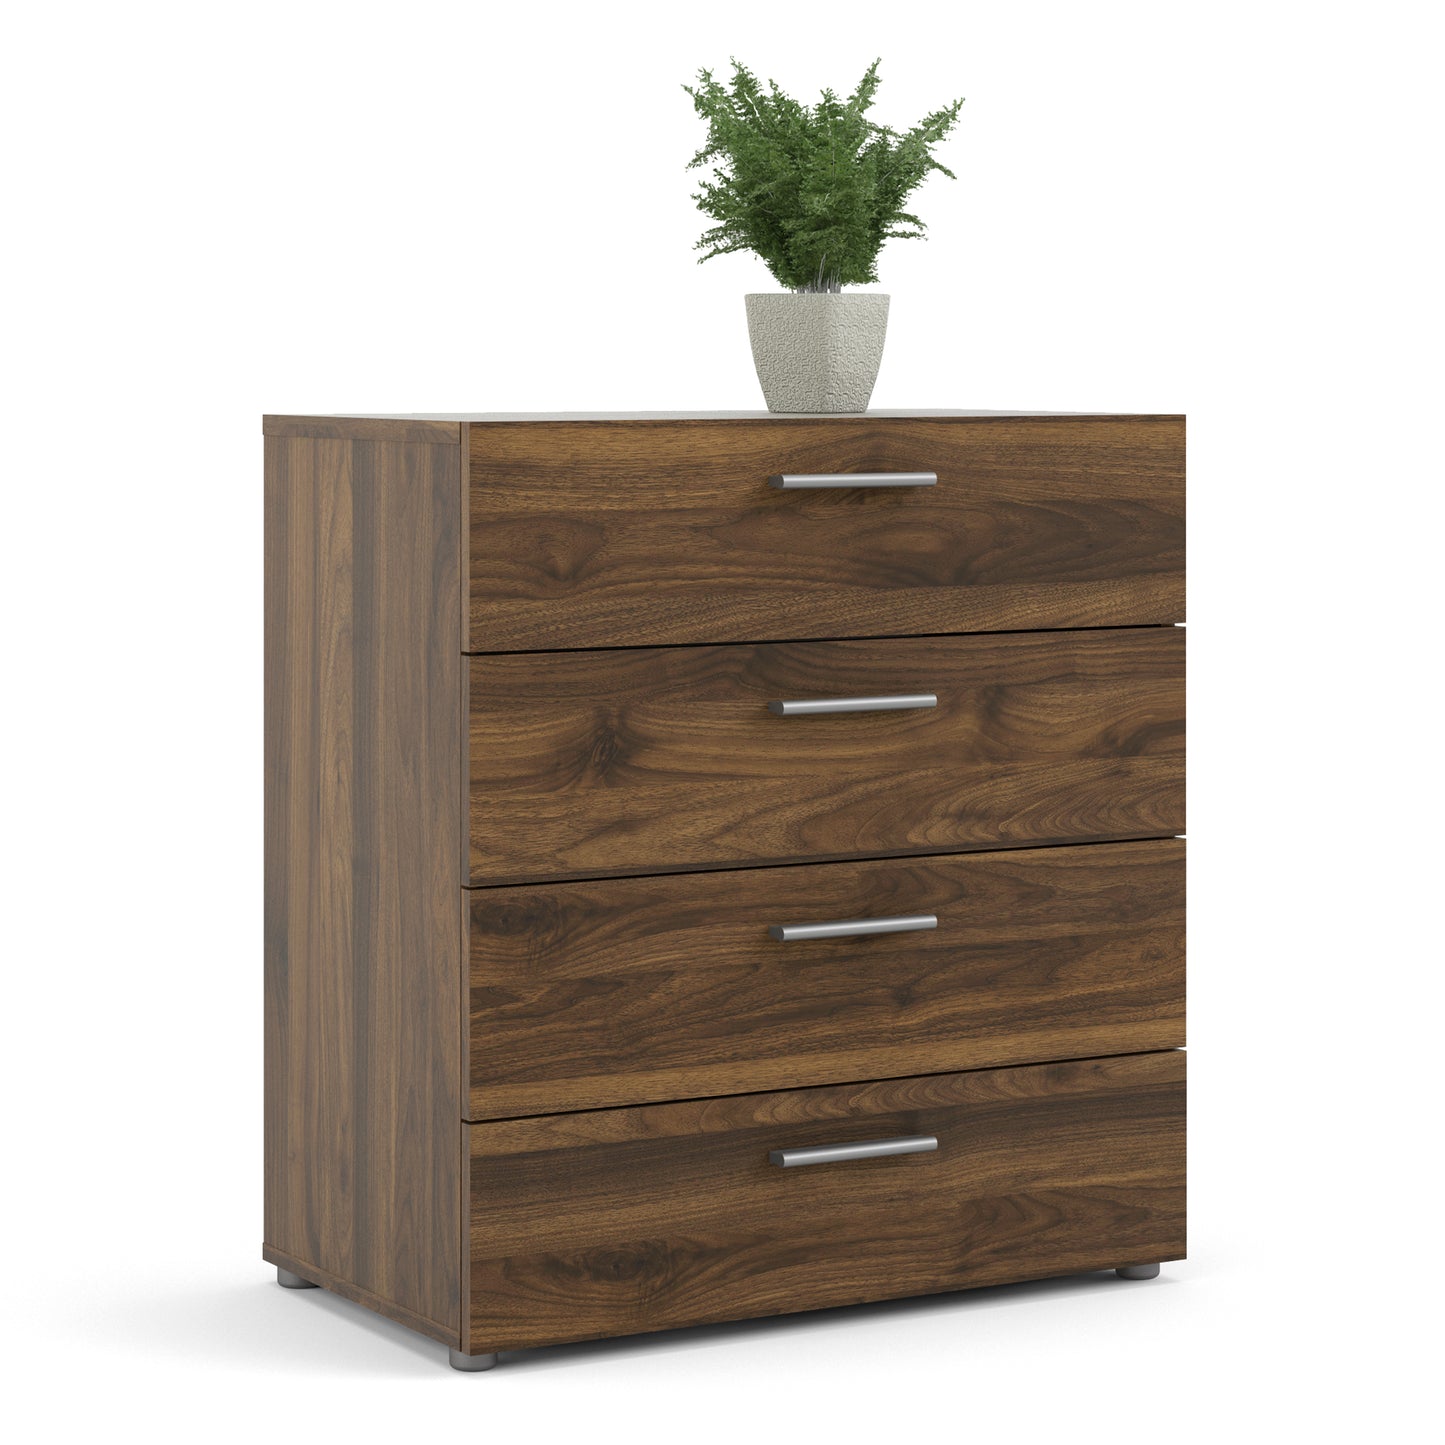 Pepe  Chest of 4 Drawers in Walnut